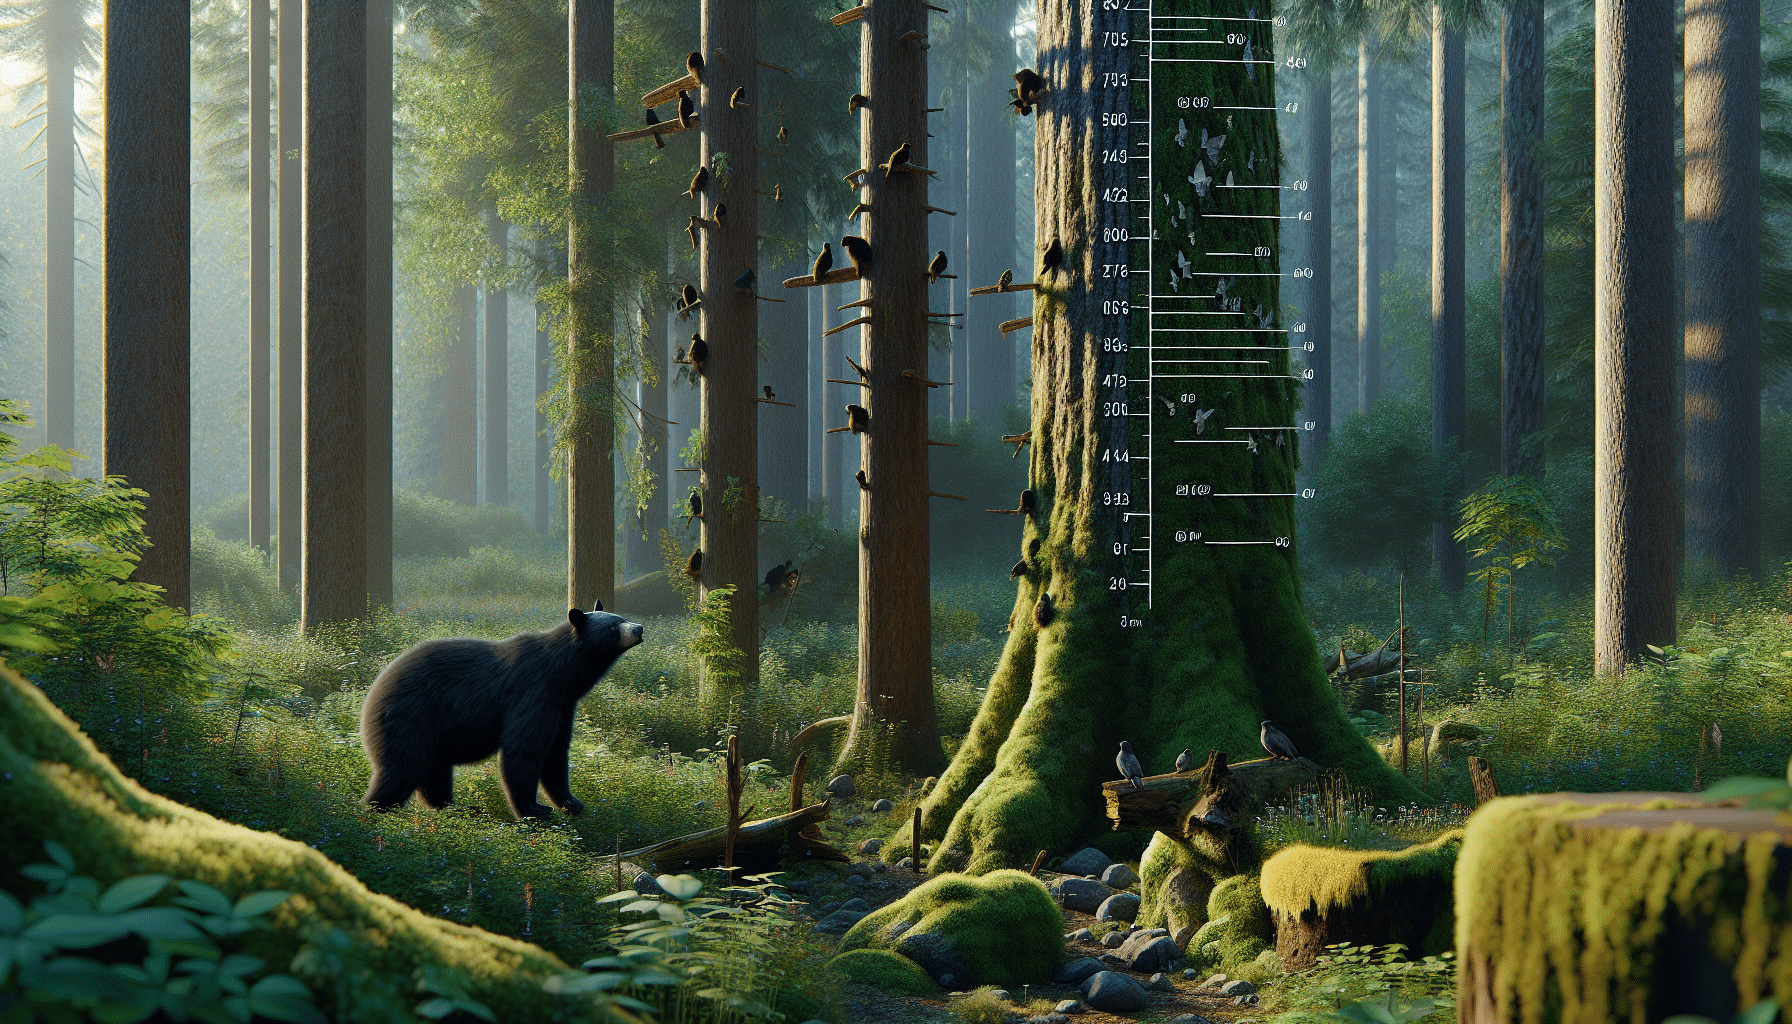 A realistic scene of a forest, wherein a black bear stands on its hind legs next to a tall tree. The tree is marked with certain visual indicators to provide context for comparing the bear's height such as small birds perched at different heights or peculiarly shaped branches. The environment is full of various plants and moss-covered rocks, hinting at their natural habitat. The time of day is late afternoon, with sunlight streaming through the canopy of leaves, casting dappled light on the bear and the surroundings. There are no humans, text, brands or logos present anywhere in the scene.